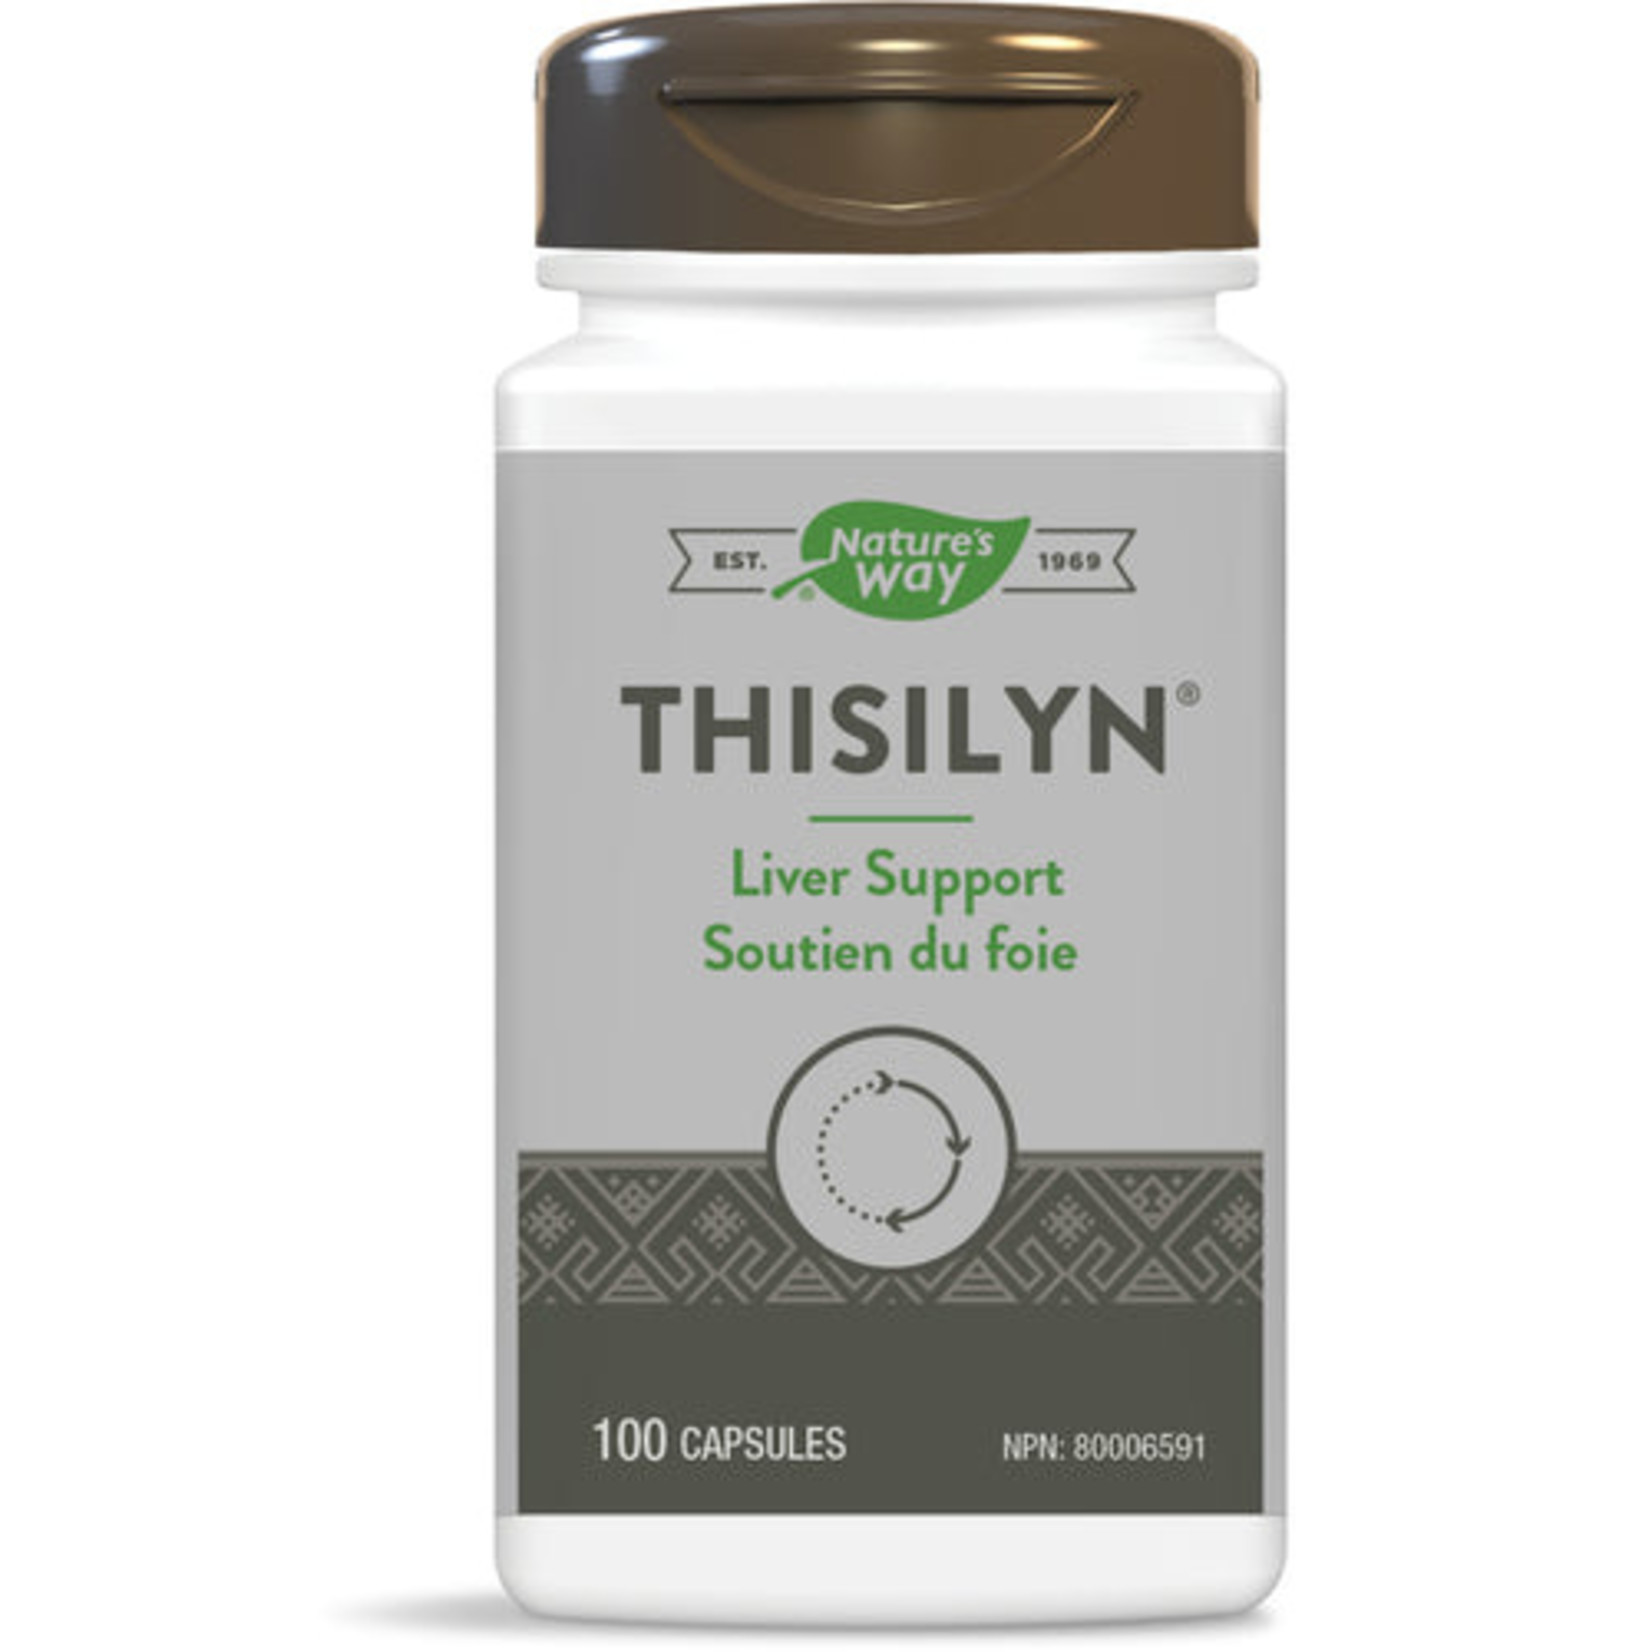 NATURES WAY NATURE'S WAY THISILYN (MILK THISTLE) 100 CAPS